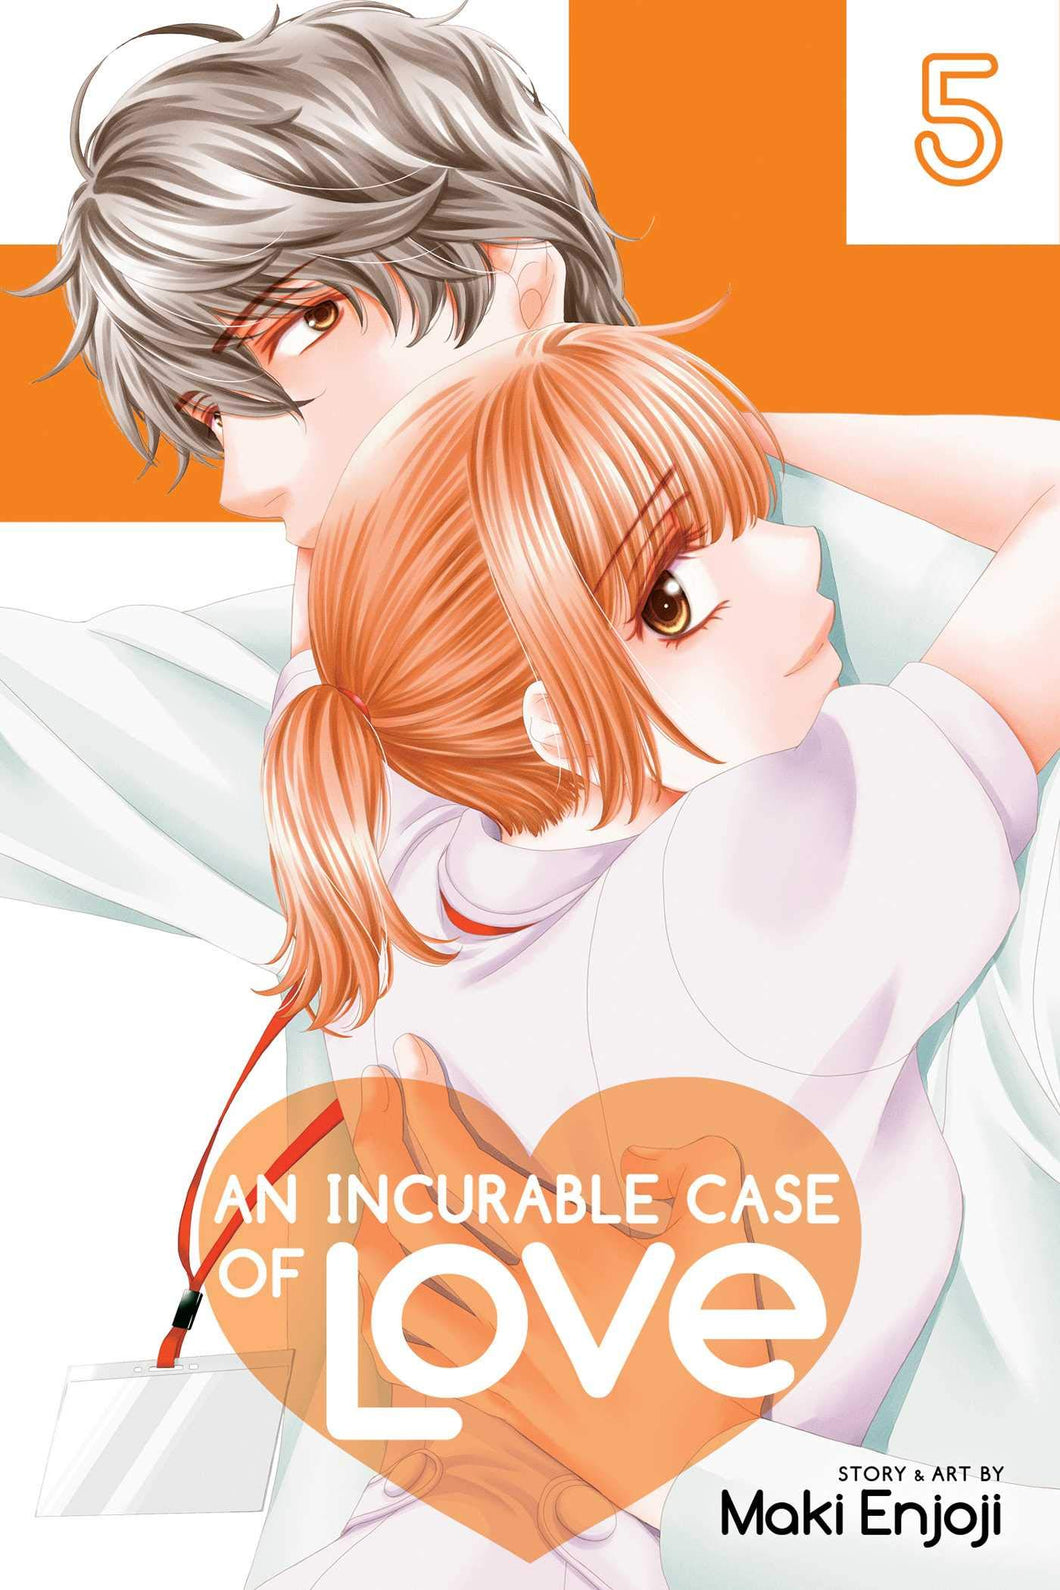 An Incurable Case of Love Volume 5